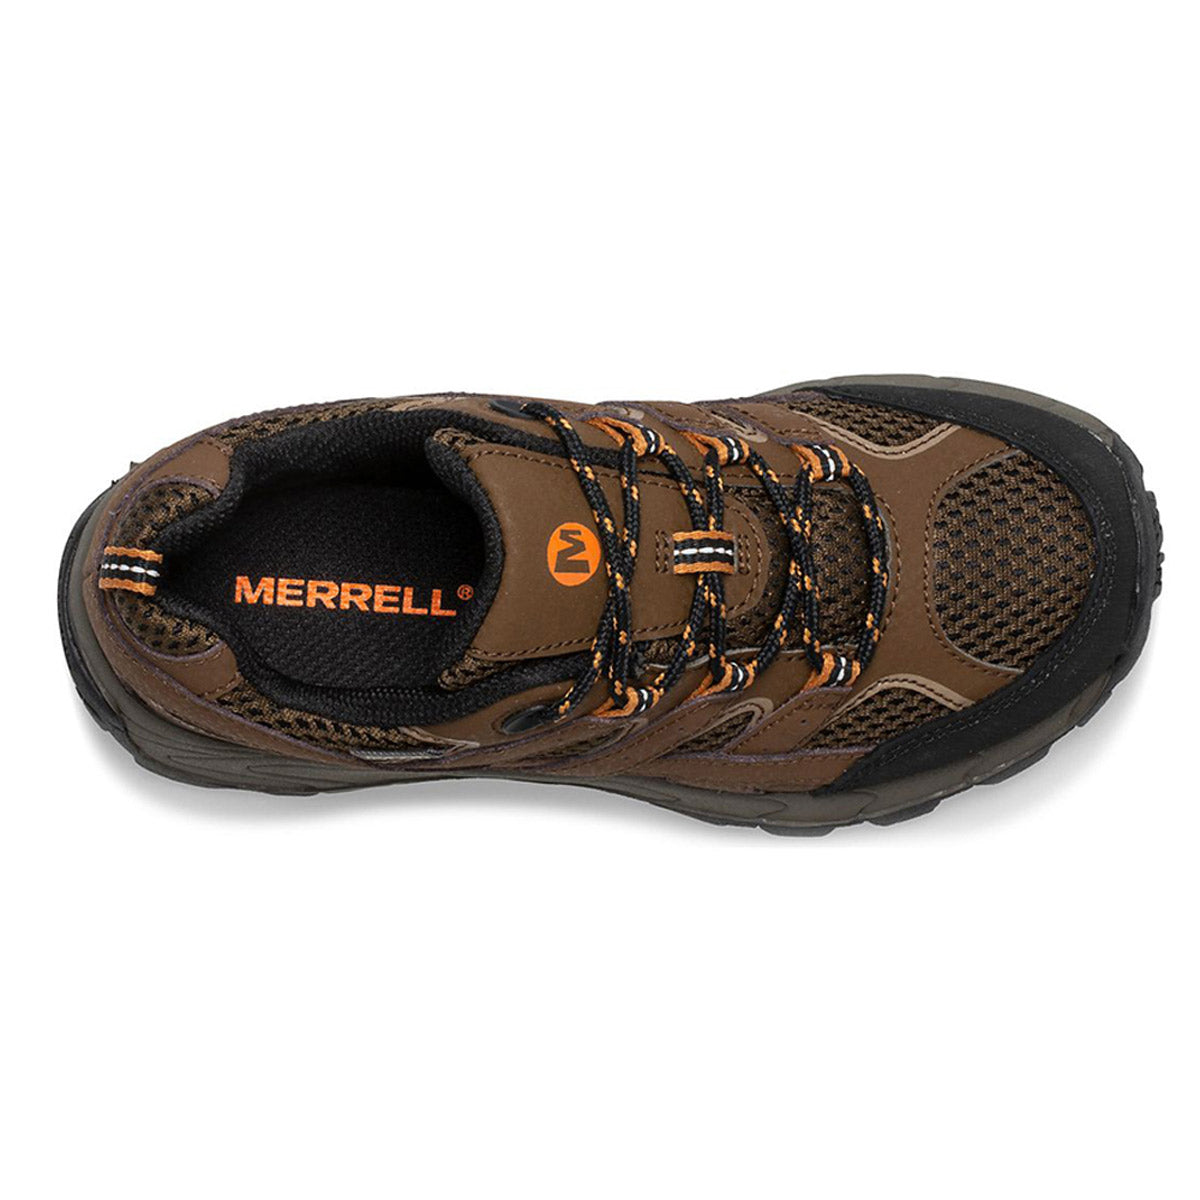 Brown Merrell Moab 2 Low Lace waterproof hiking shoe on a white background.